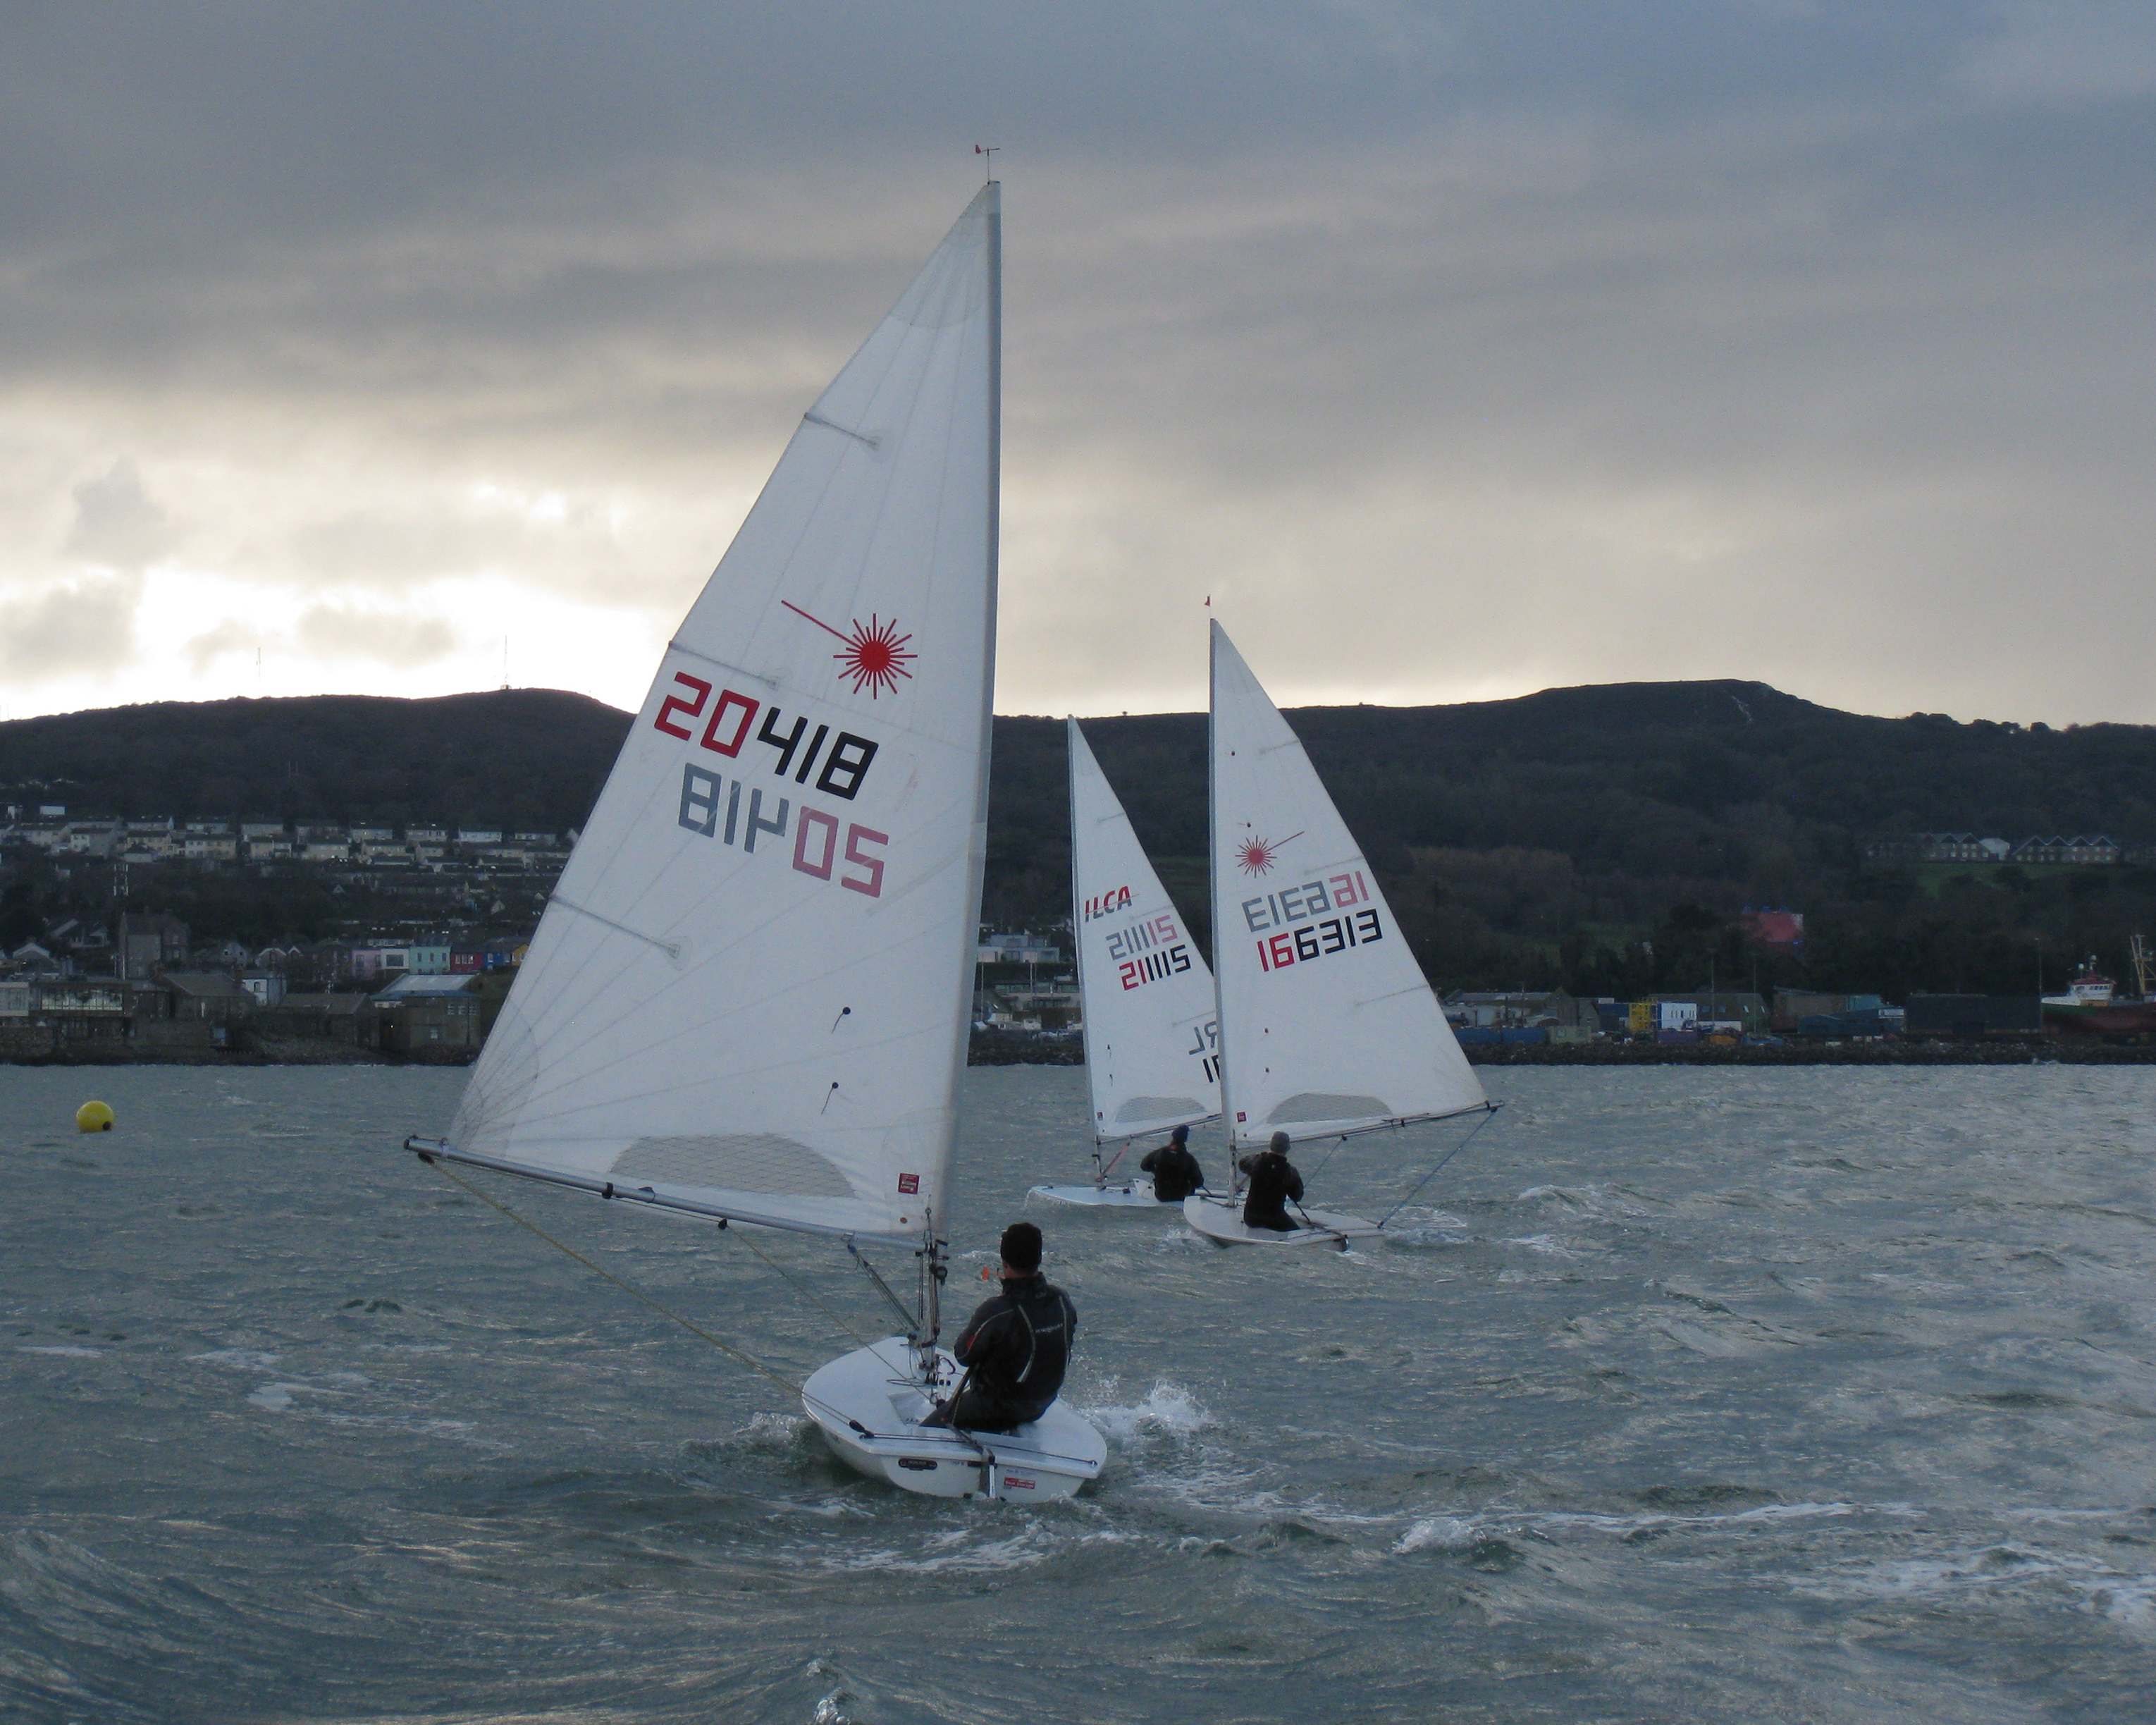 Rory Lynch (Baltimore SC) leading Ronan Wallace (Wexford HB&TC) and Dan O'Connell (Cove SC) to the leeward mark